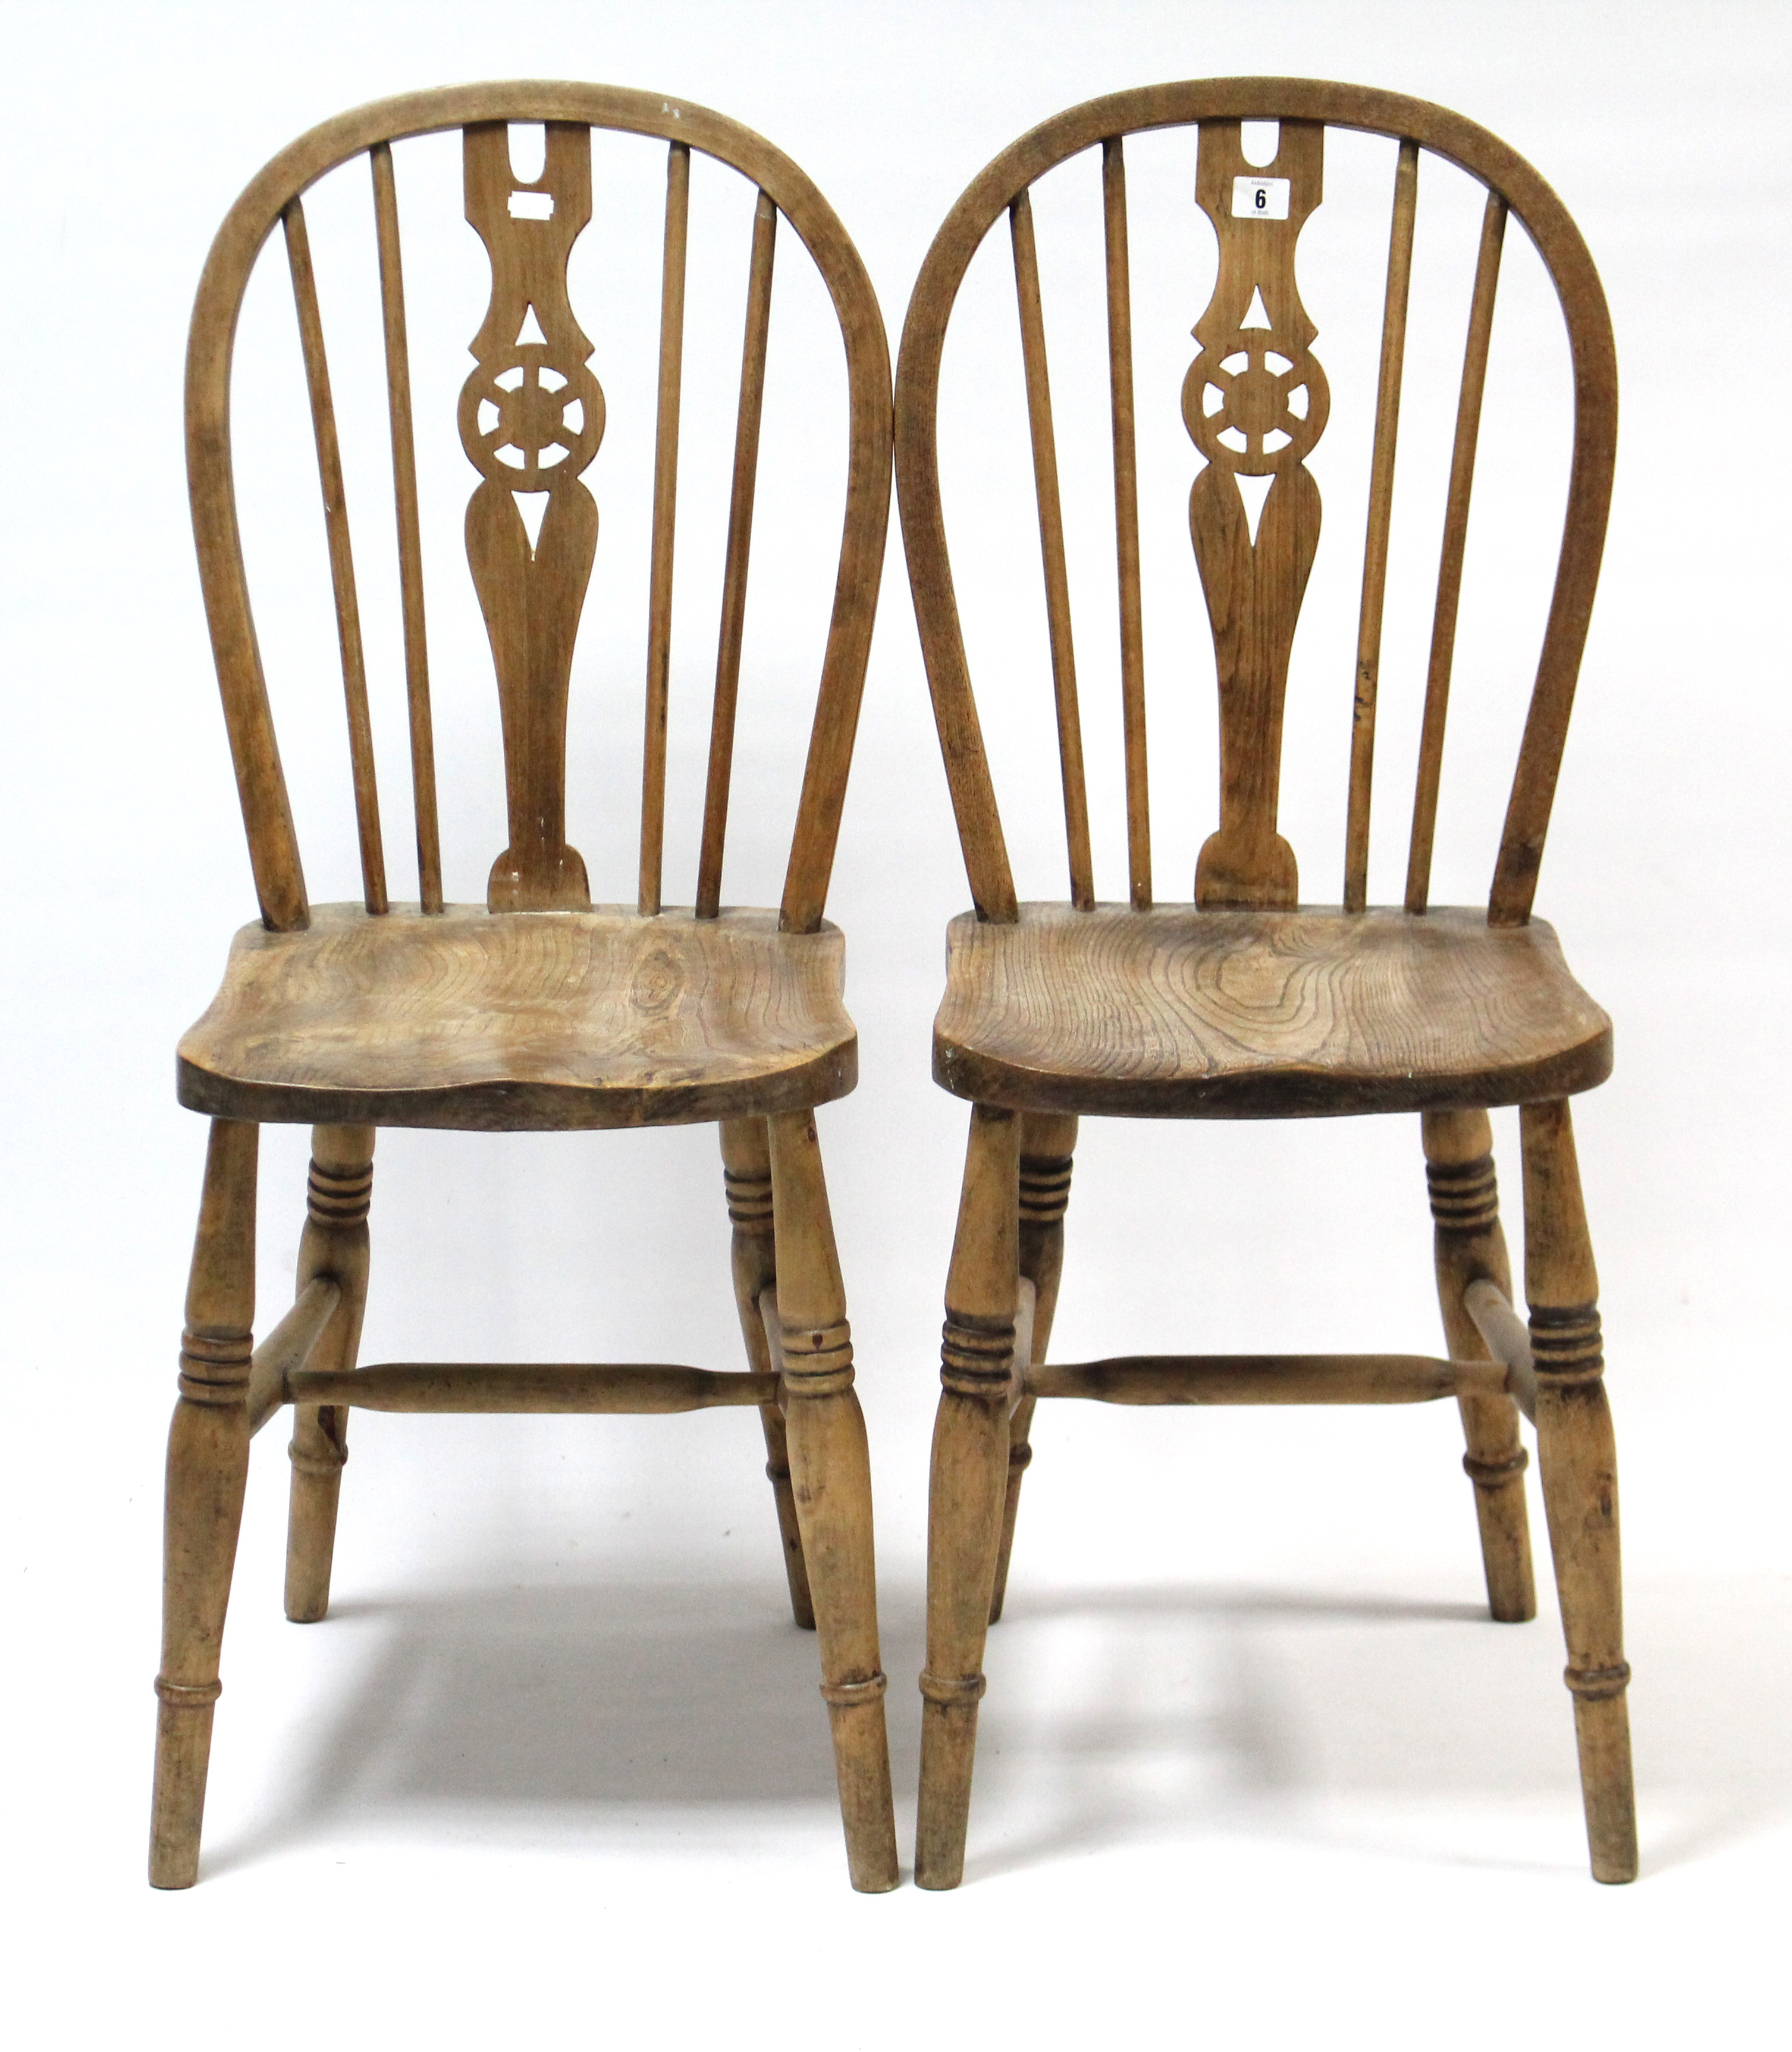 A pair of Windsor-style wheel-back kitchen chairs with hard seats, & on ring-turned legs with